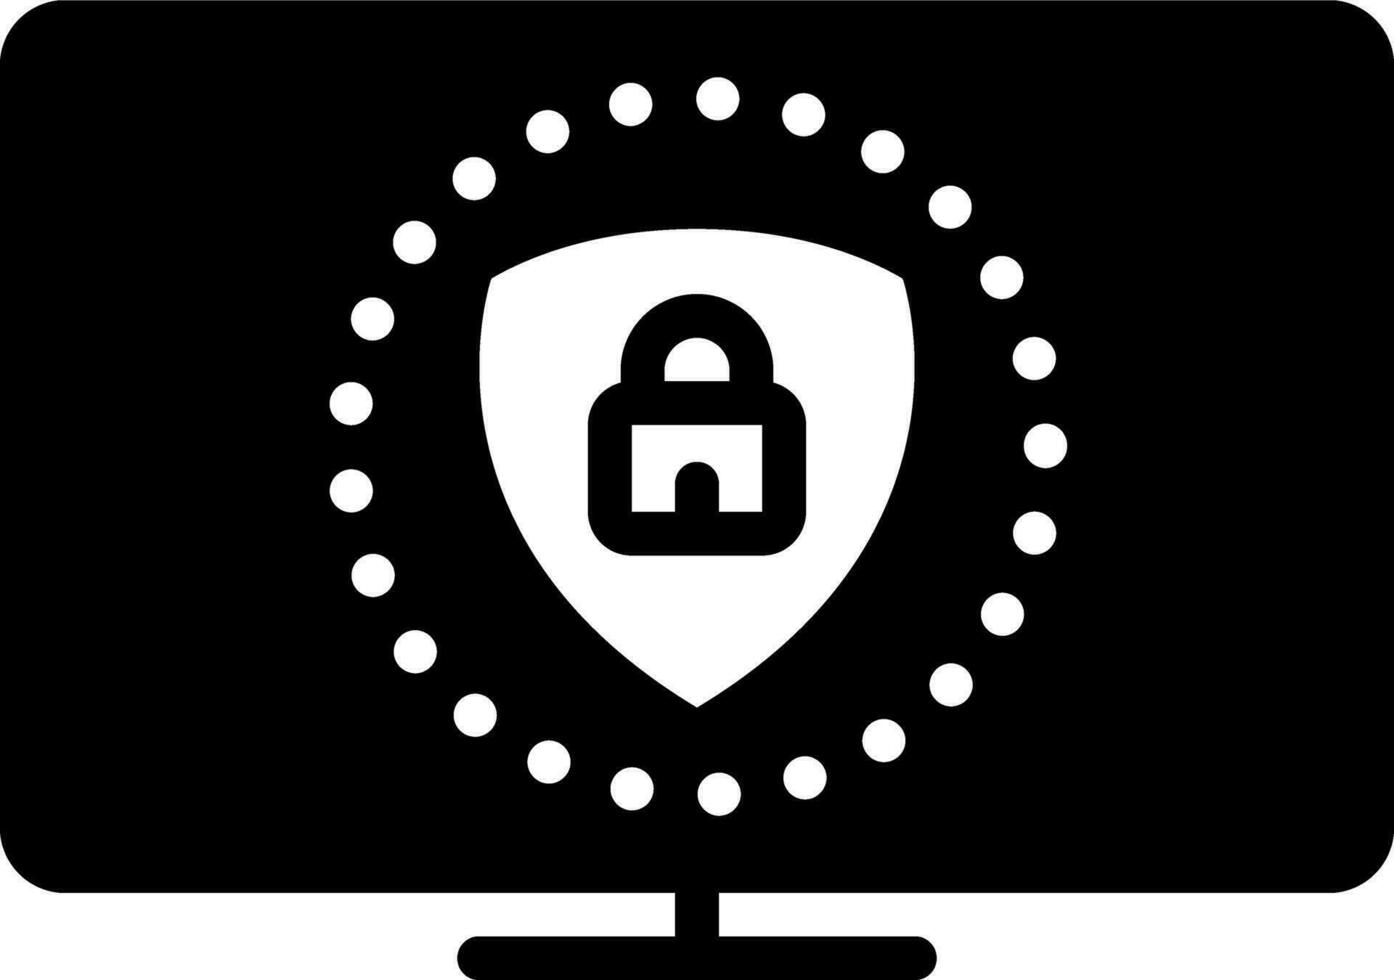 solid icon for protection vector